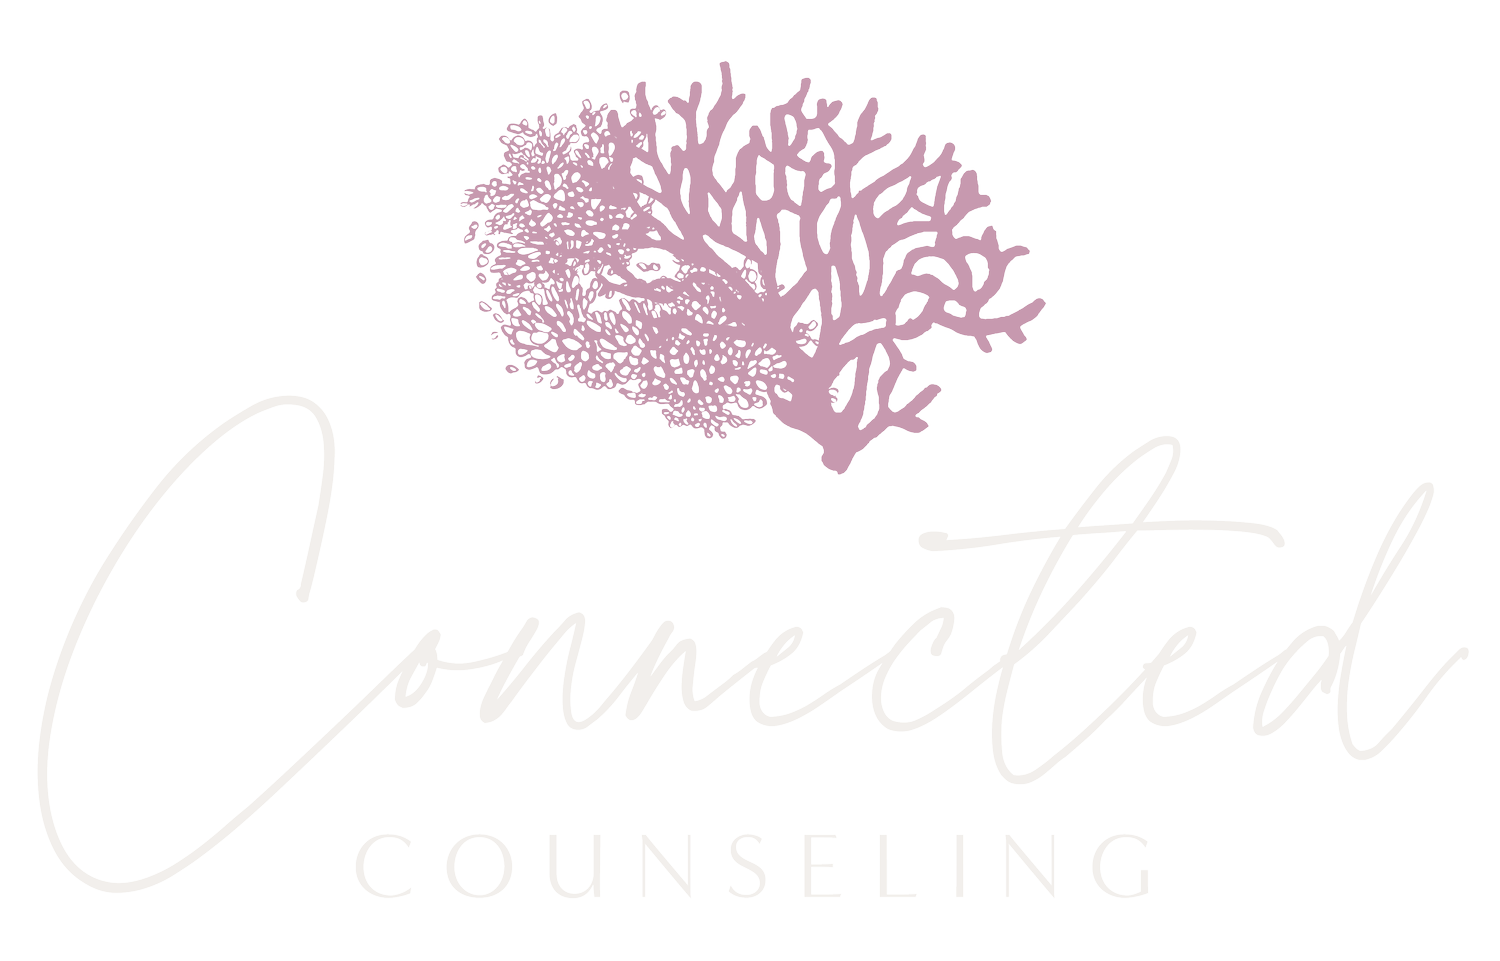 Connected Counseling